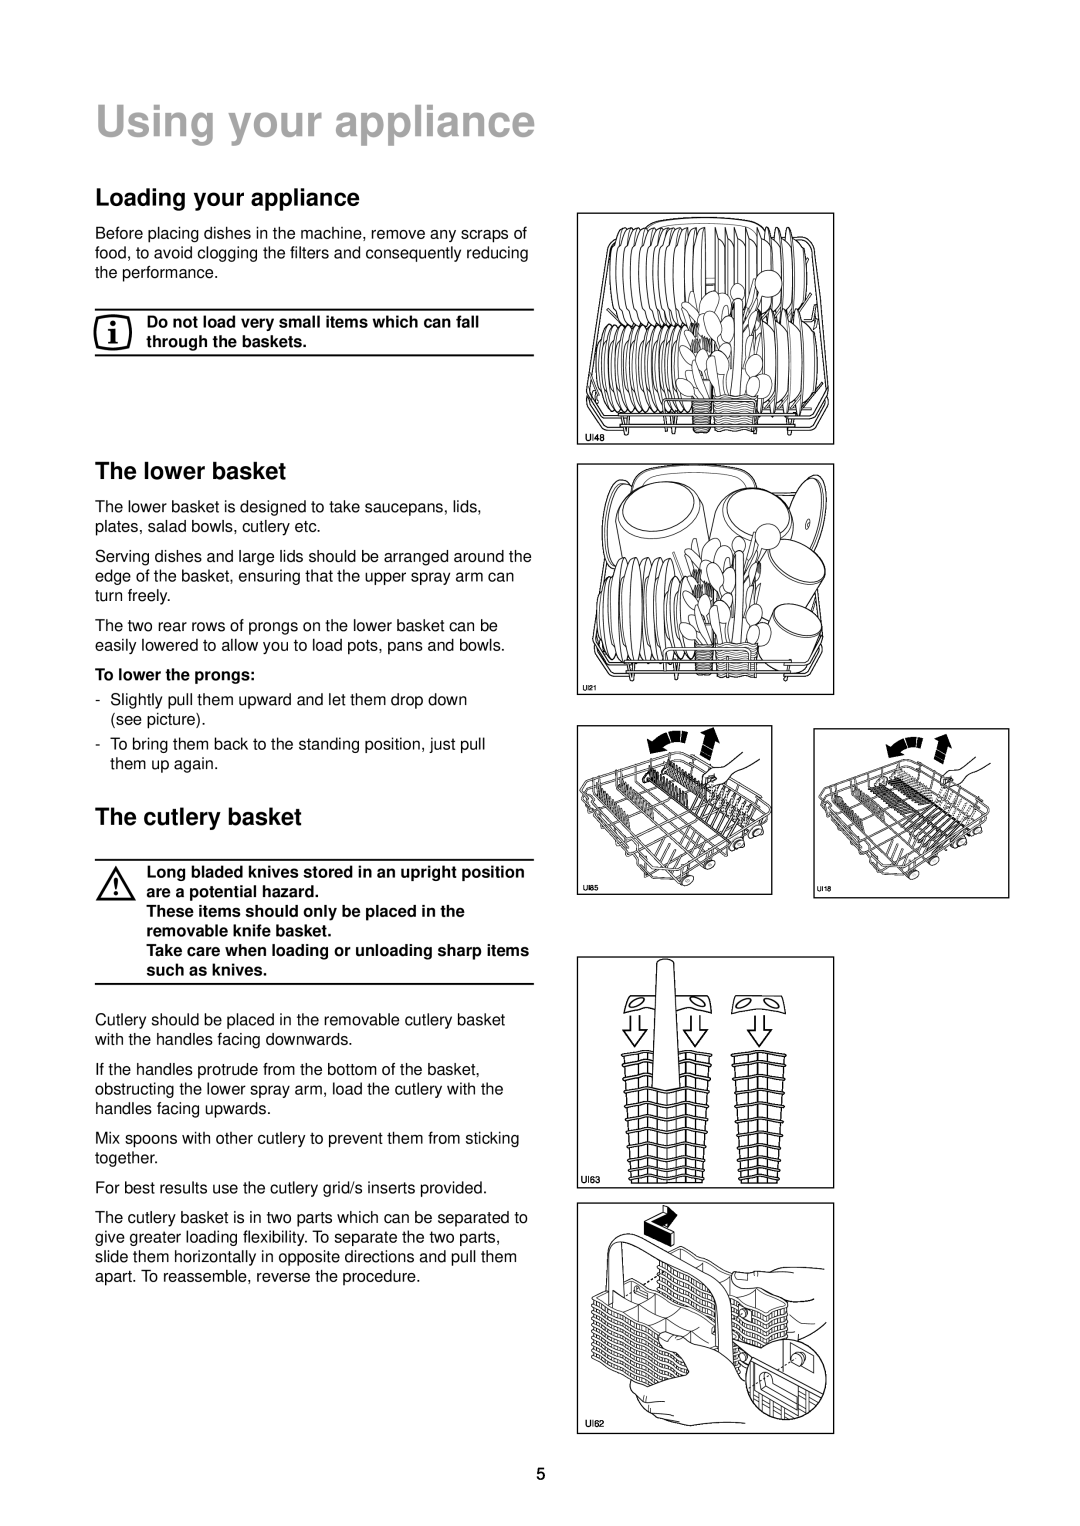 Zanussi ZT 6905 Using your appliance, Loading your appliance, The lower basket, The cutlery basket, To lower the prongs 